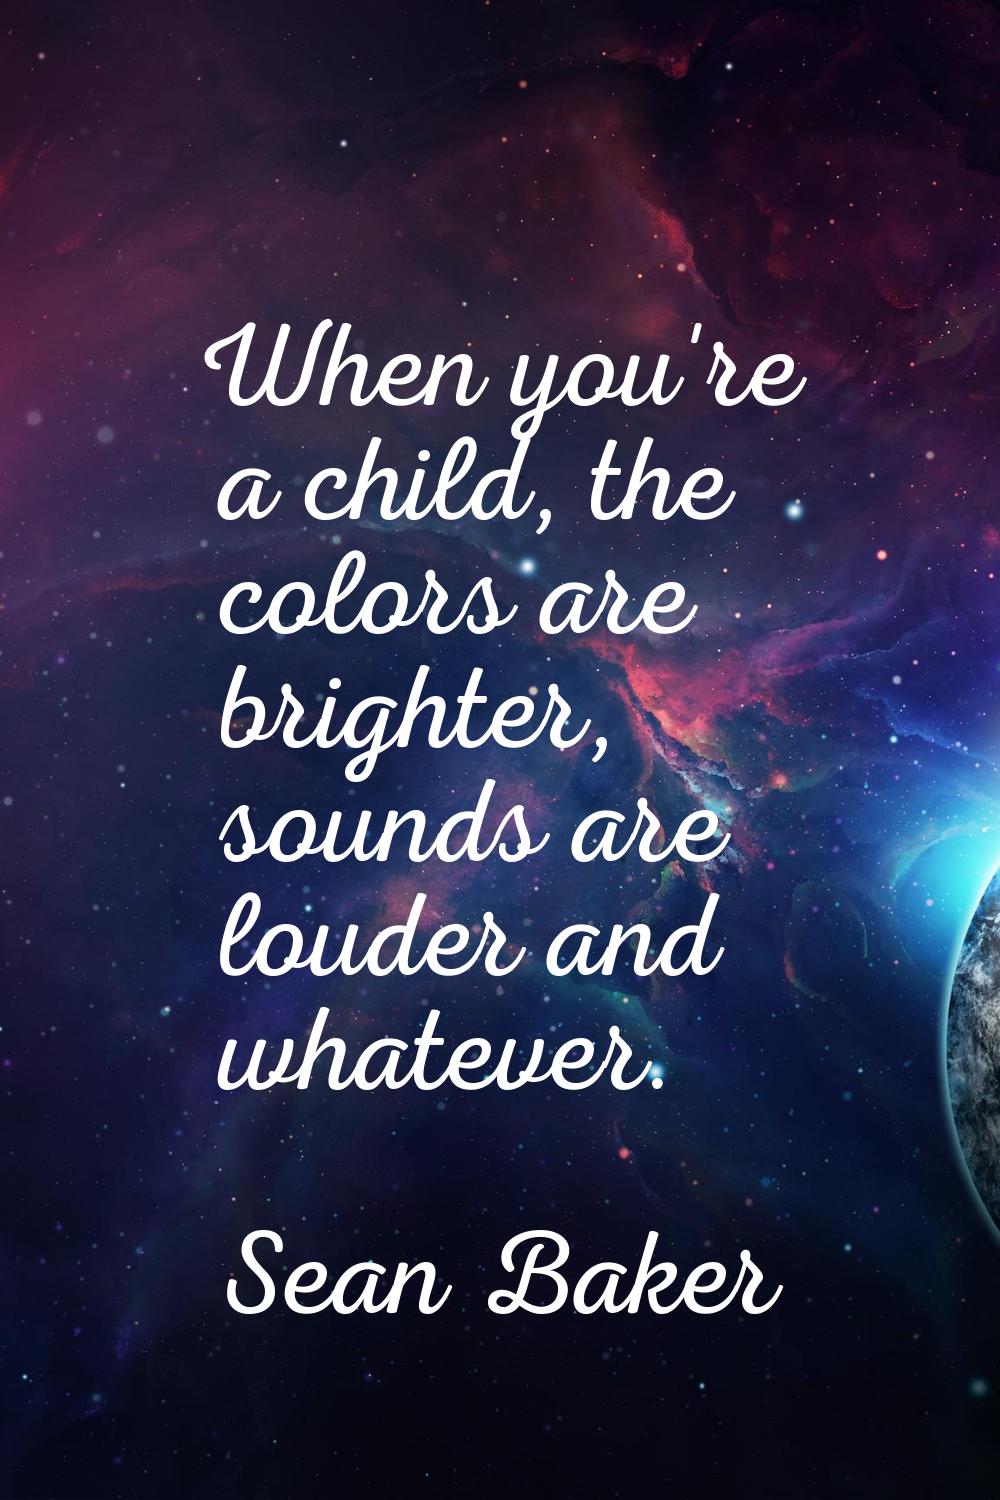 When you're a child, the colors are brighter, sounds are louder and whatever.